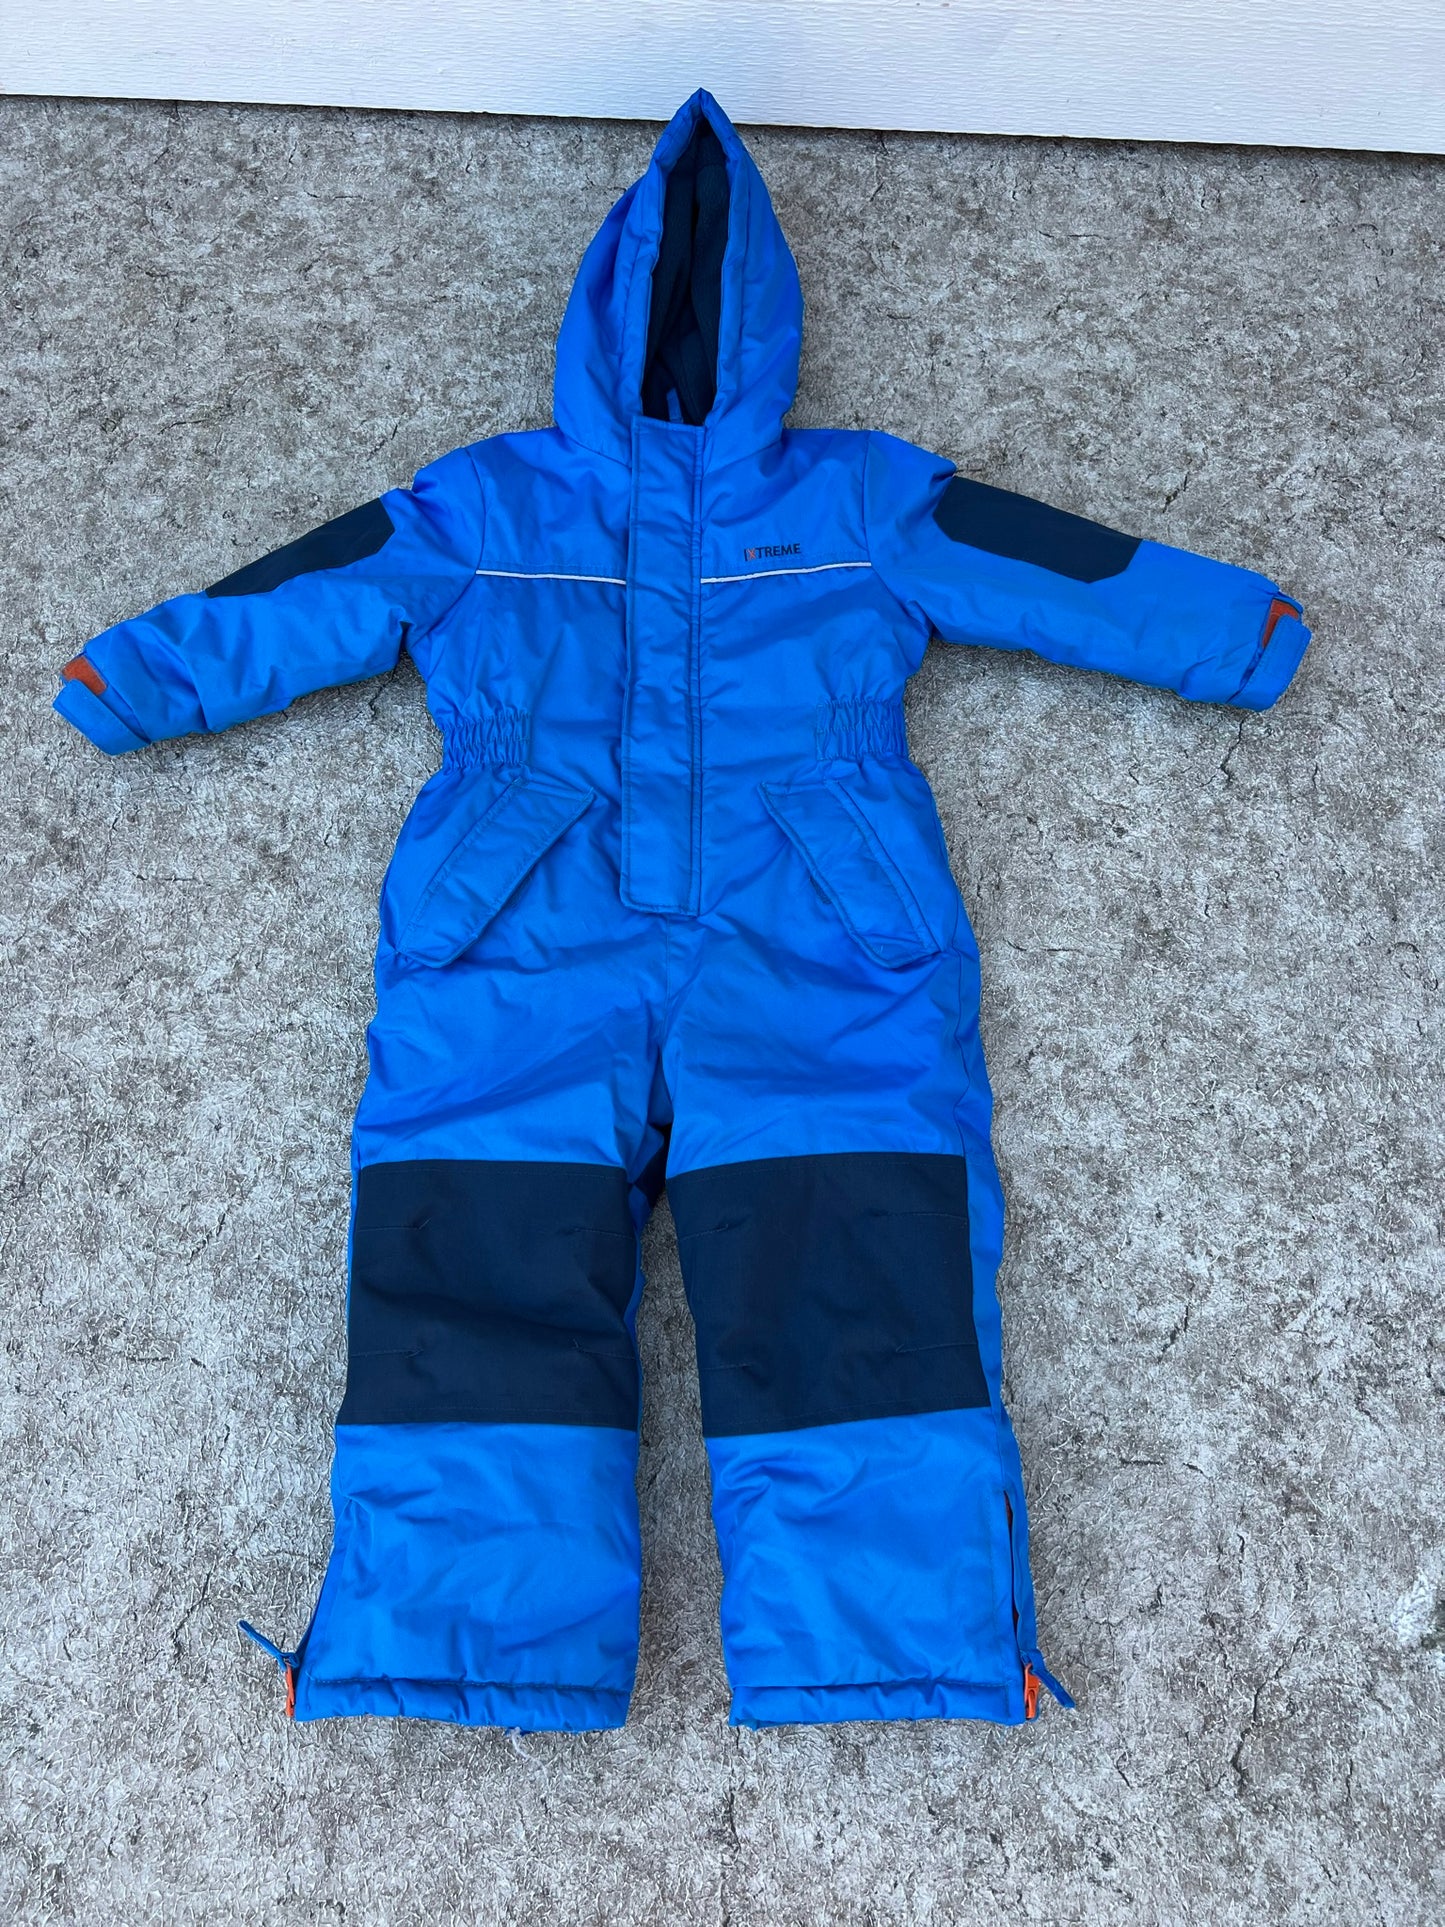 Snowsuit Child Size 3 T Xtreame Blue and Tangerine Fleece Lined As New